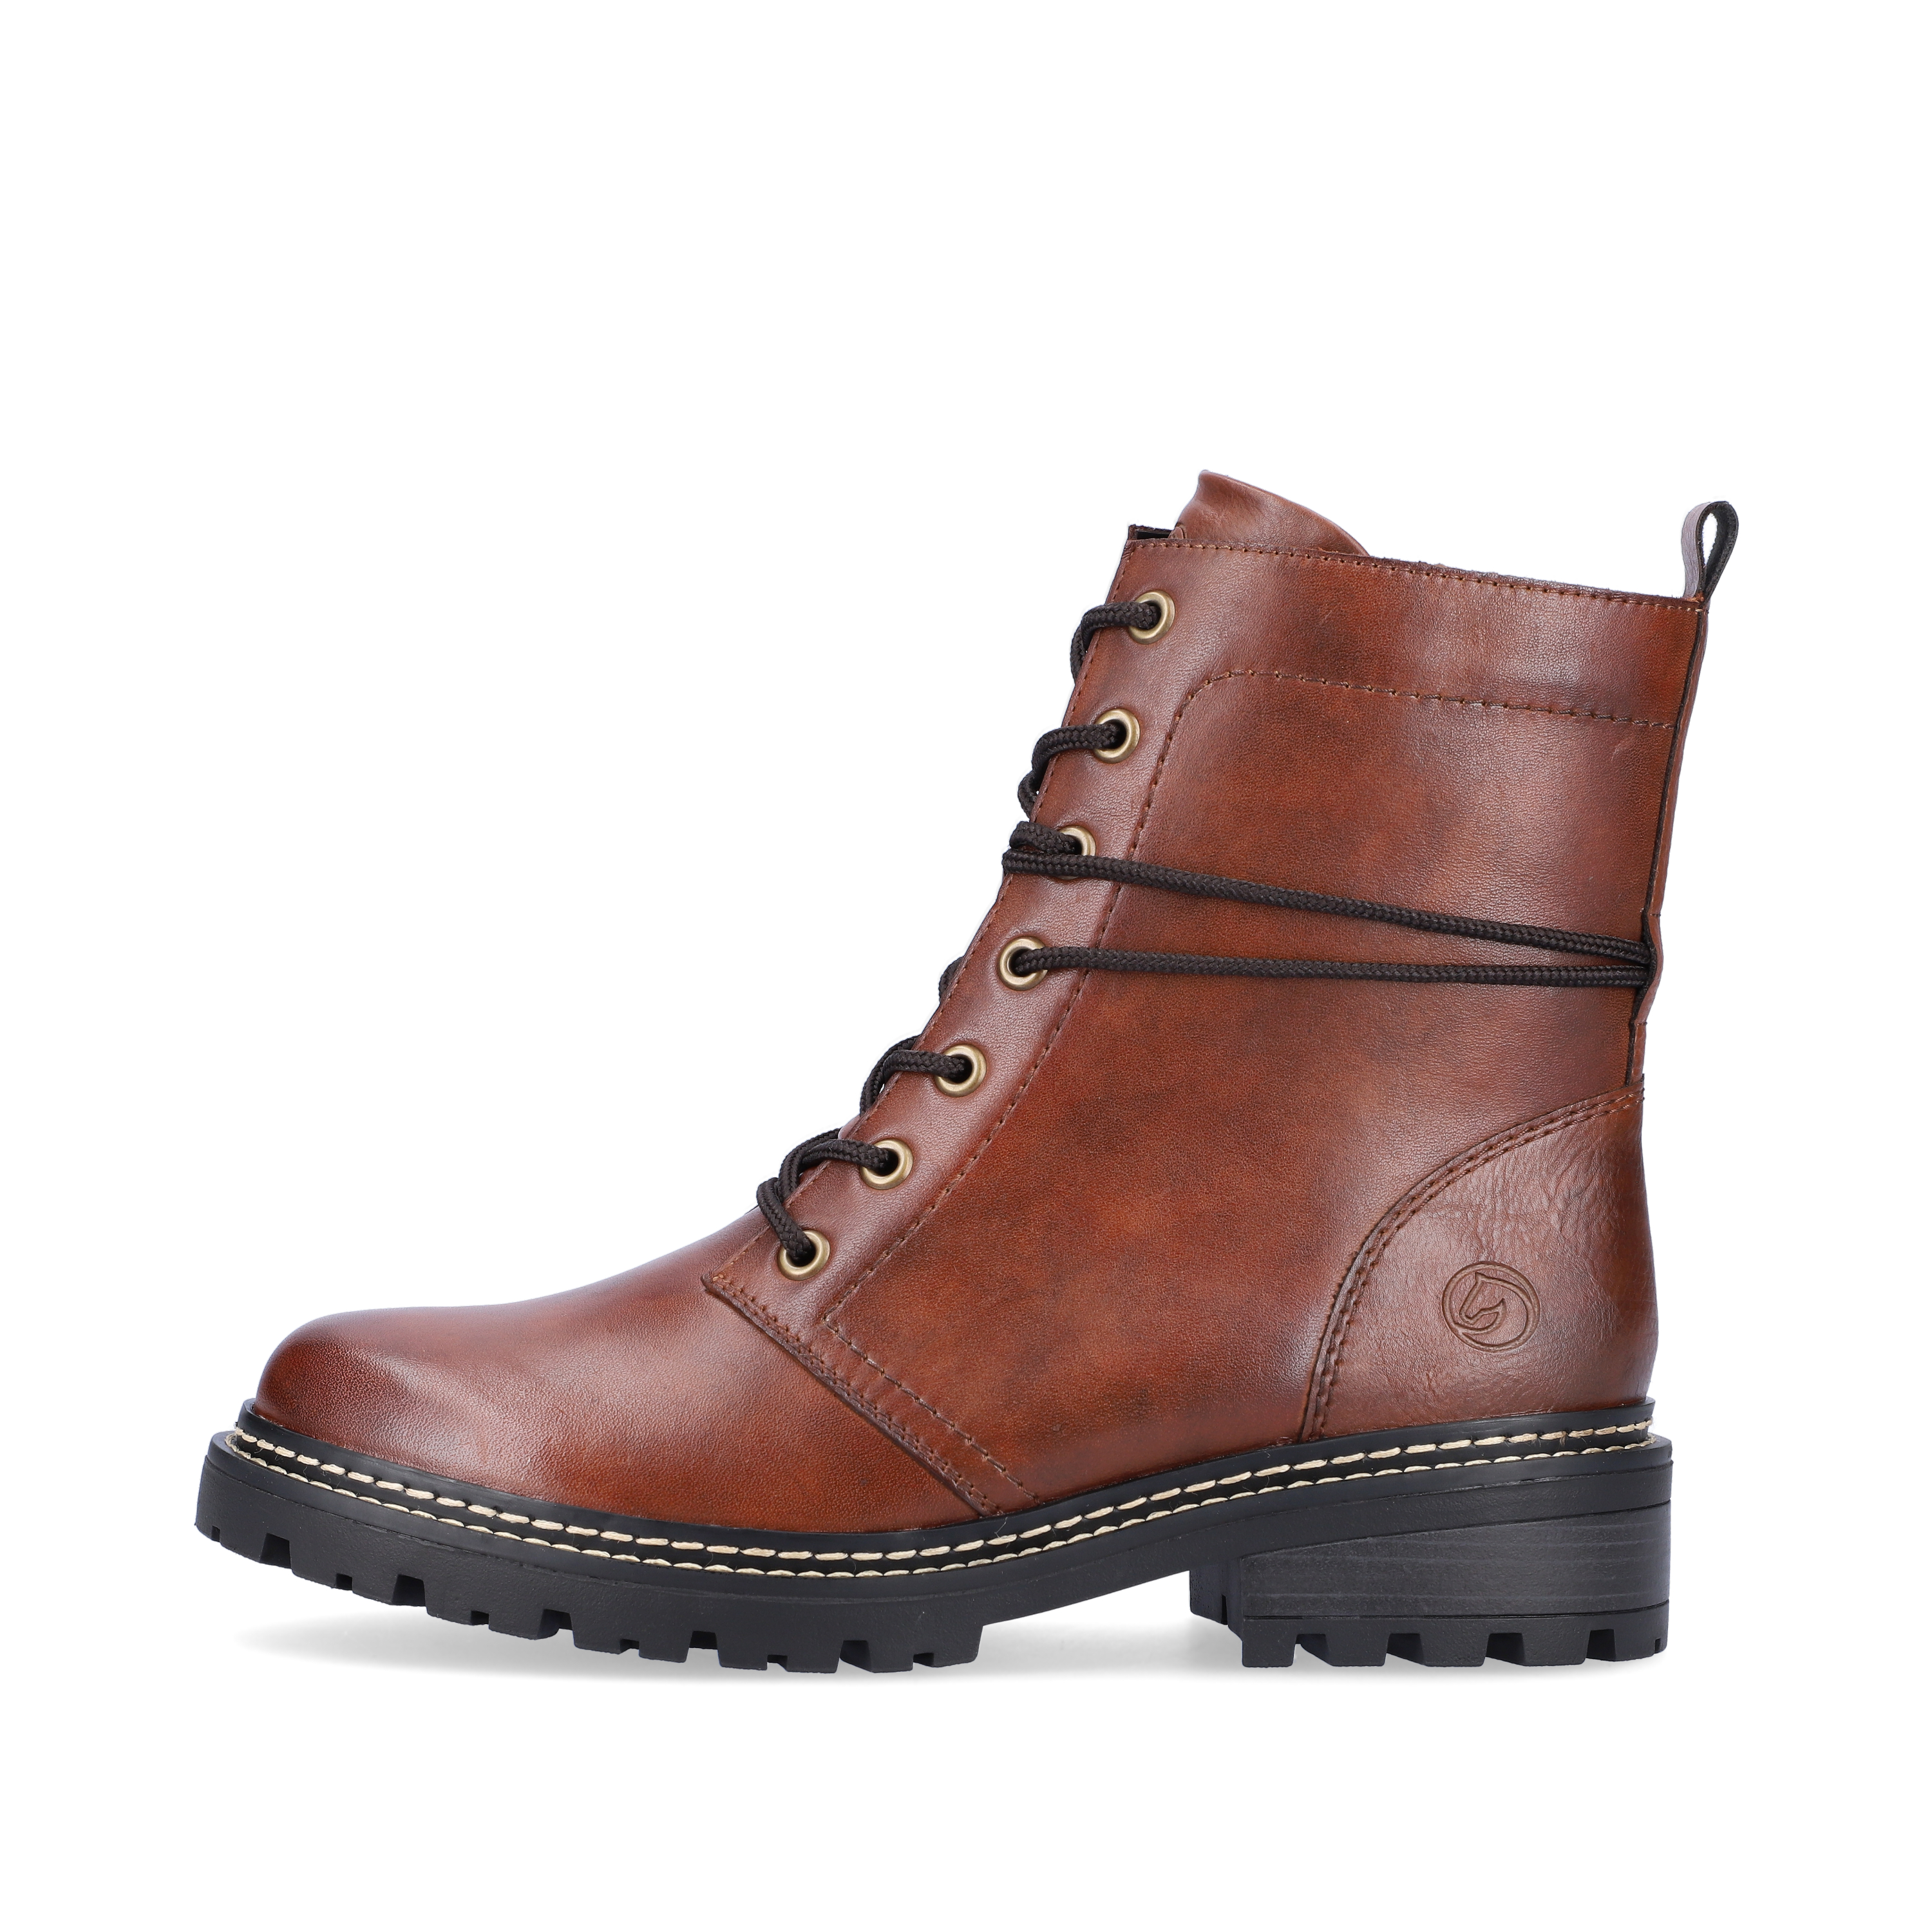 Caramel brown remonte women´s biker boots D0B75-22 with cushioning profile sole. The outside of the shoe